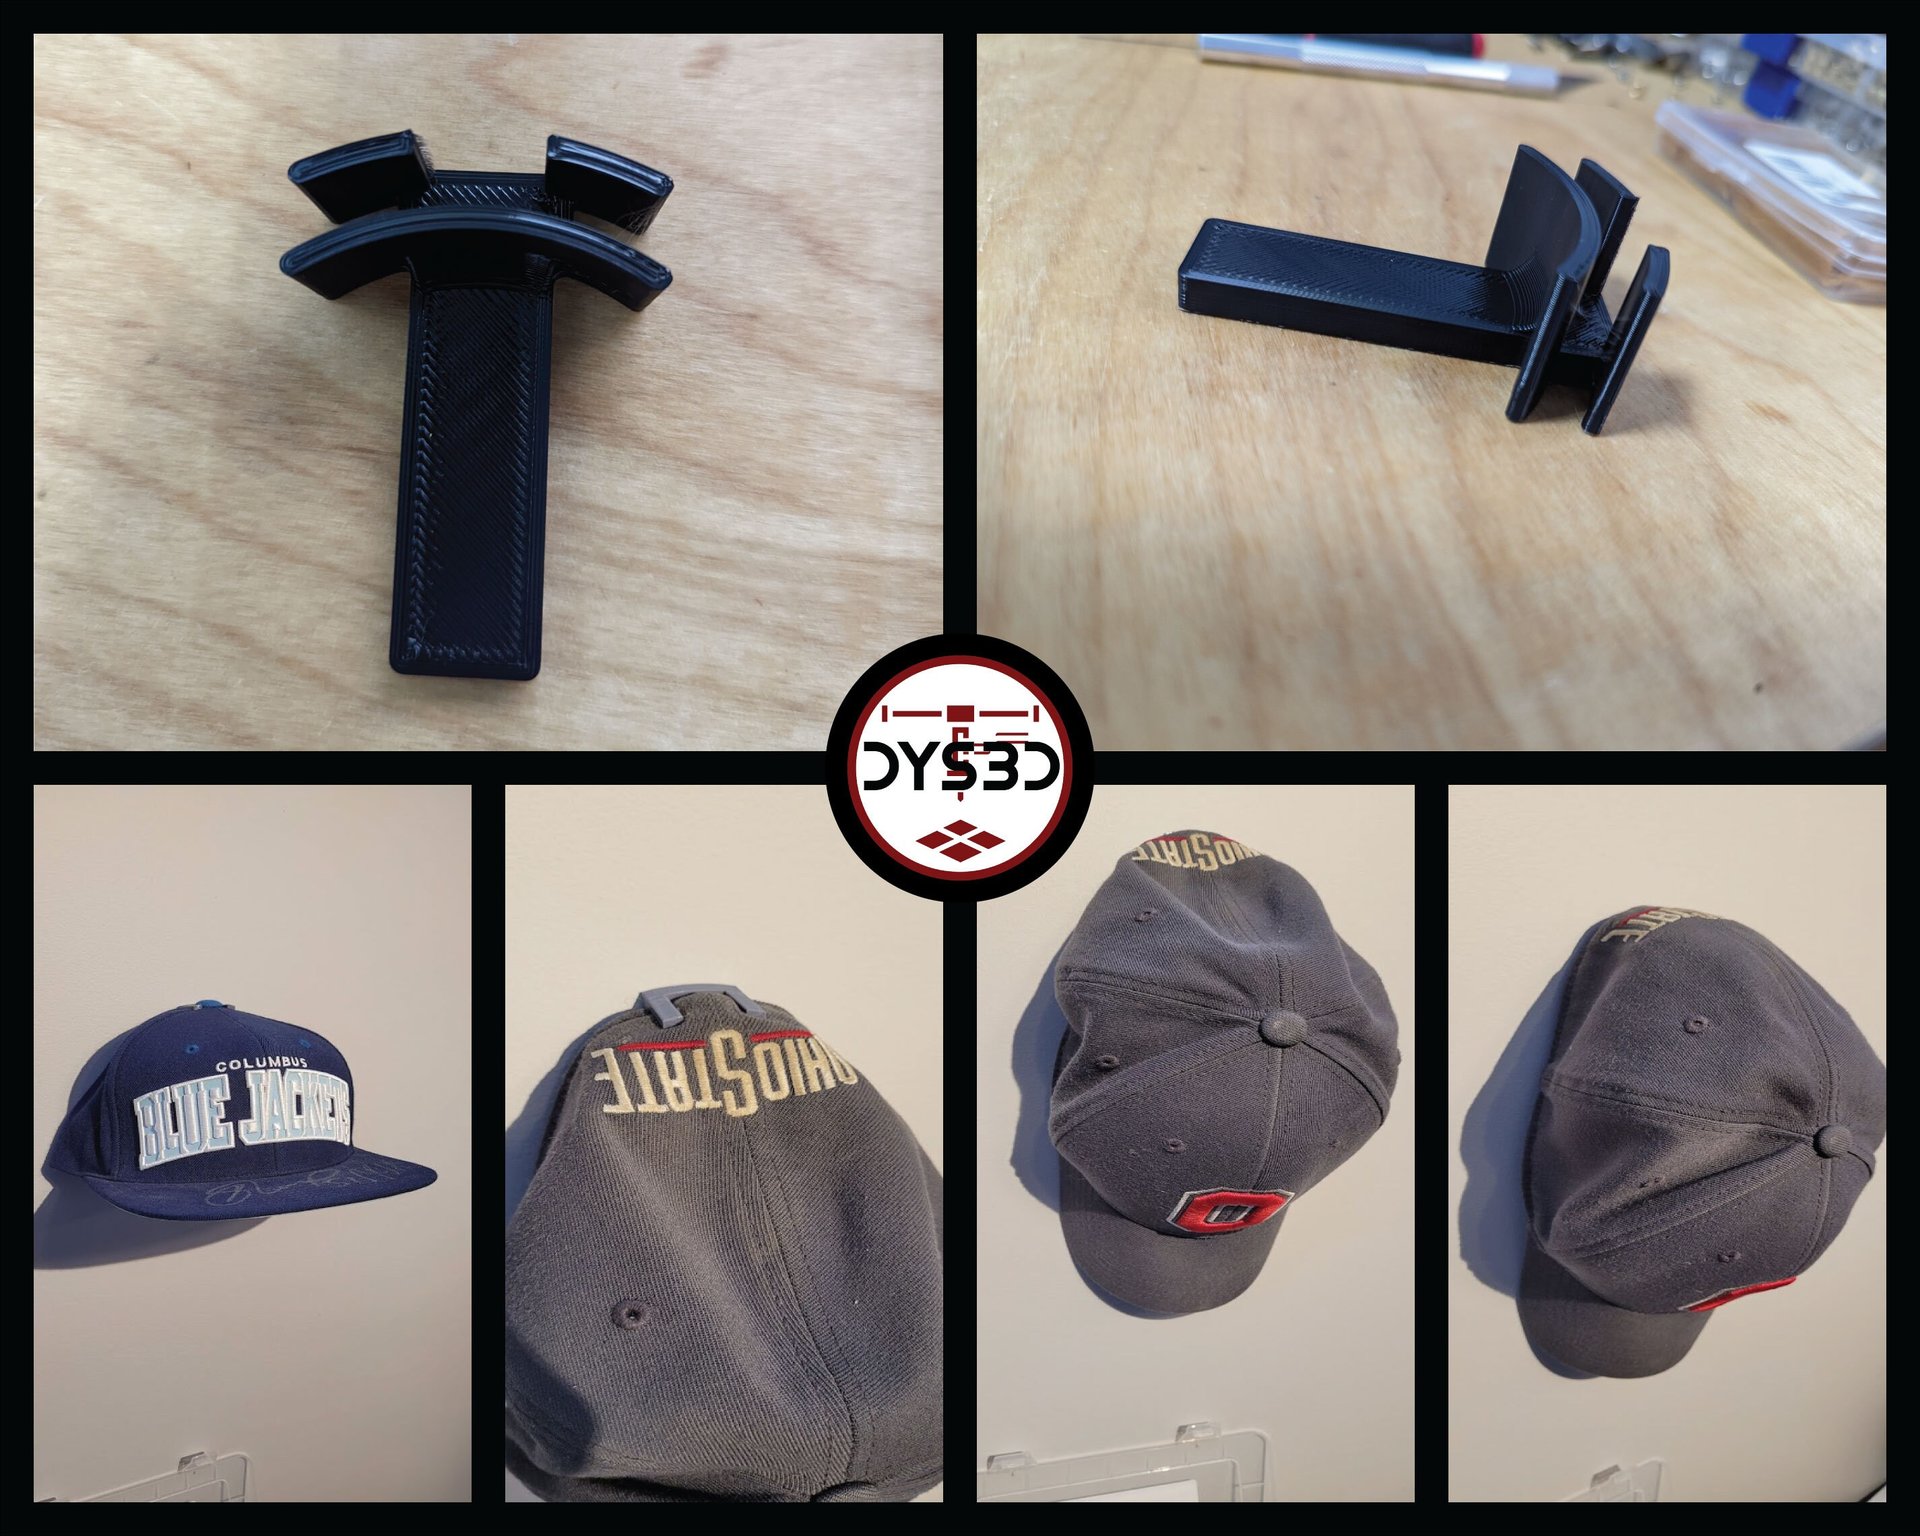 Wall Mount Display/Hook for Hats